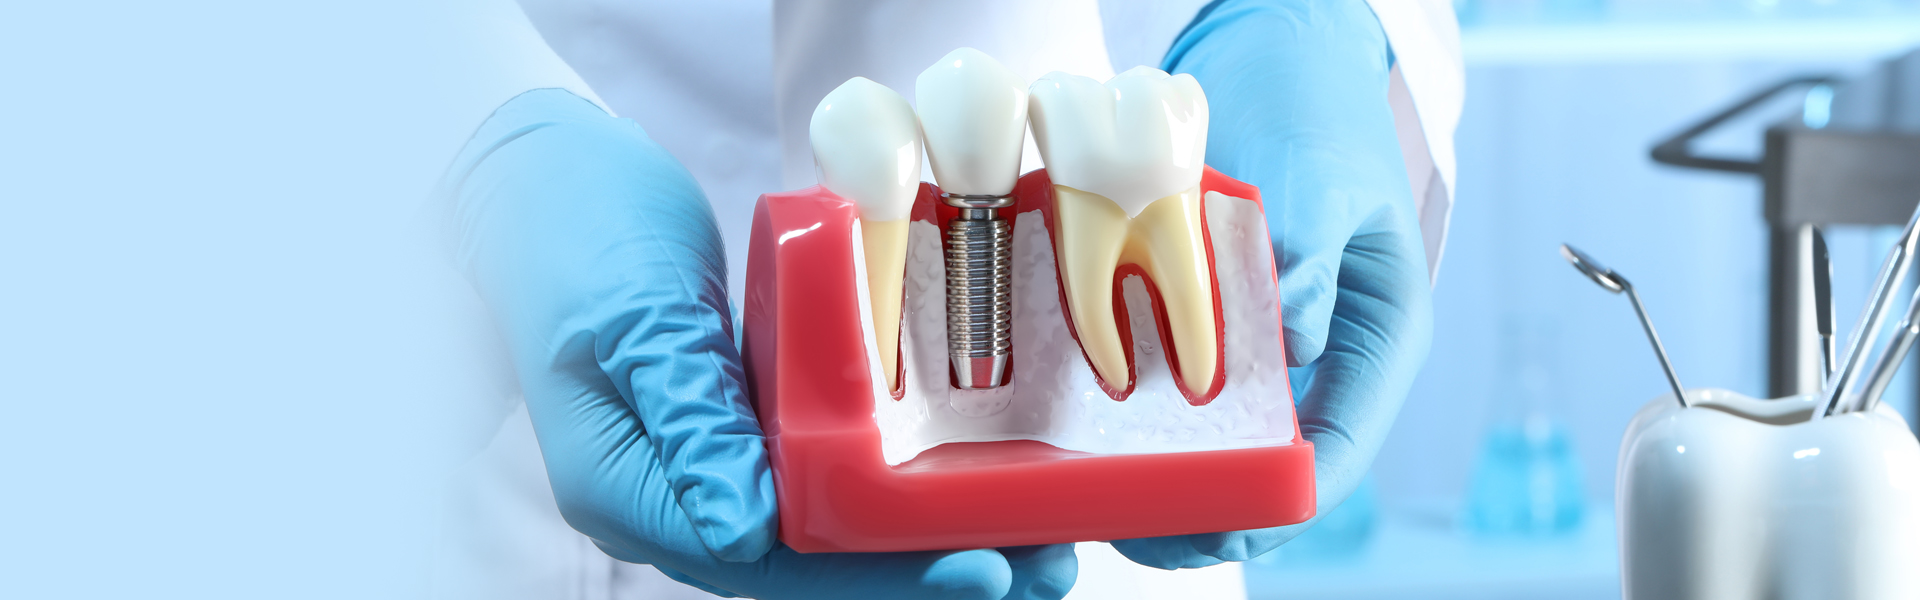 Do Dental Implants Require Crowns?